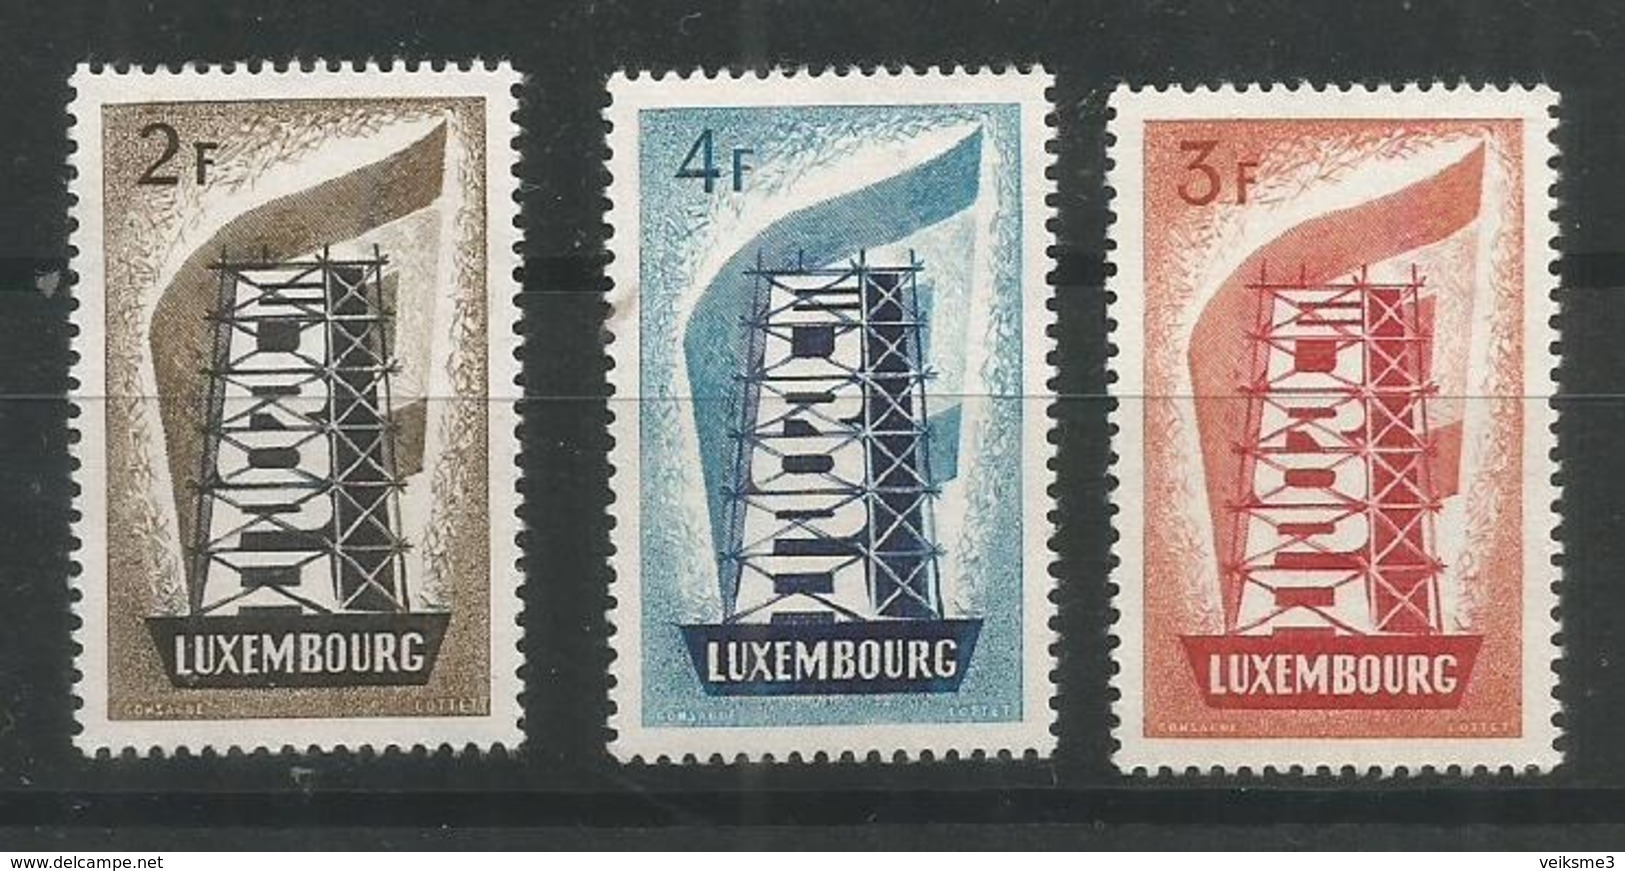 LUXEMBOURG - MNH - Europa-CEPT - Architecture - 1956 - 1956